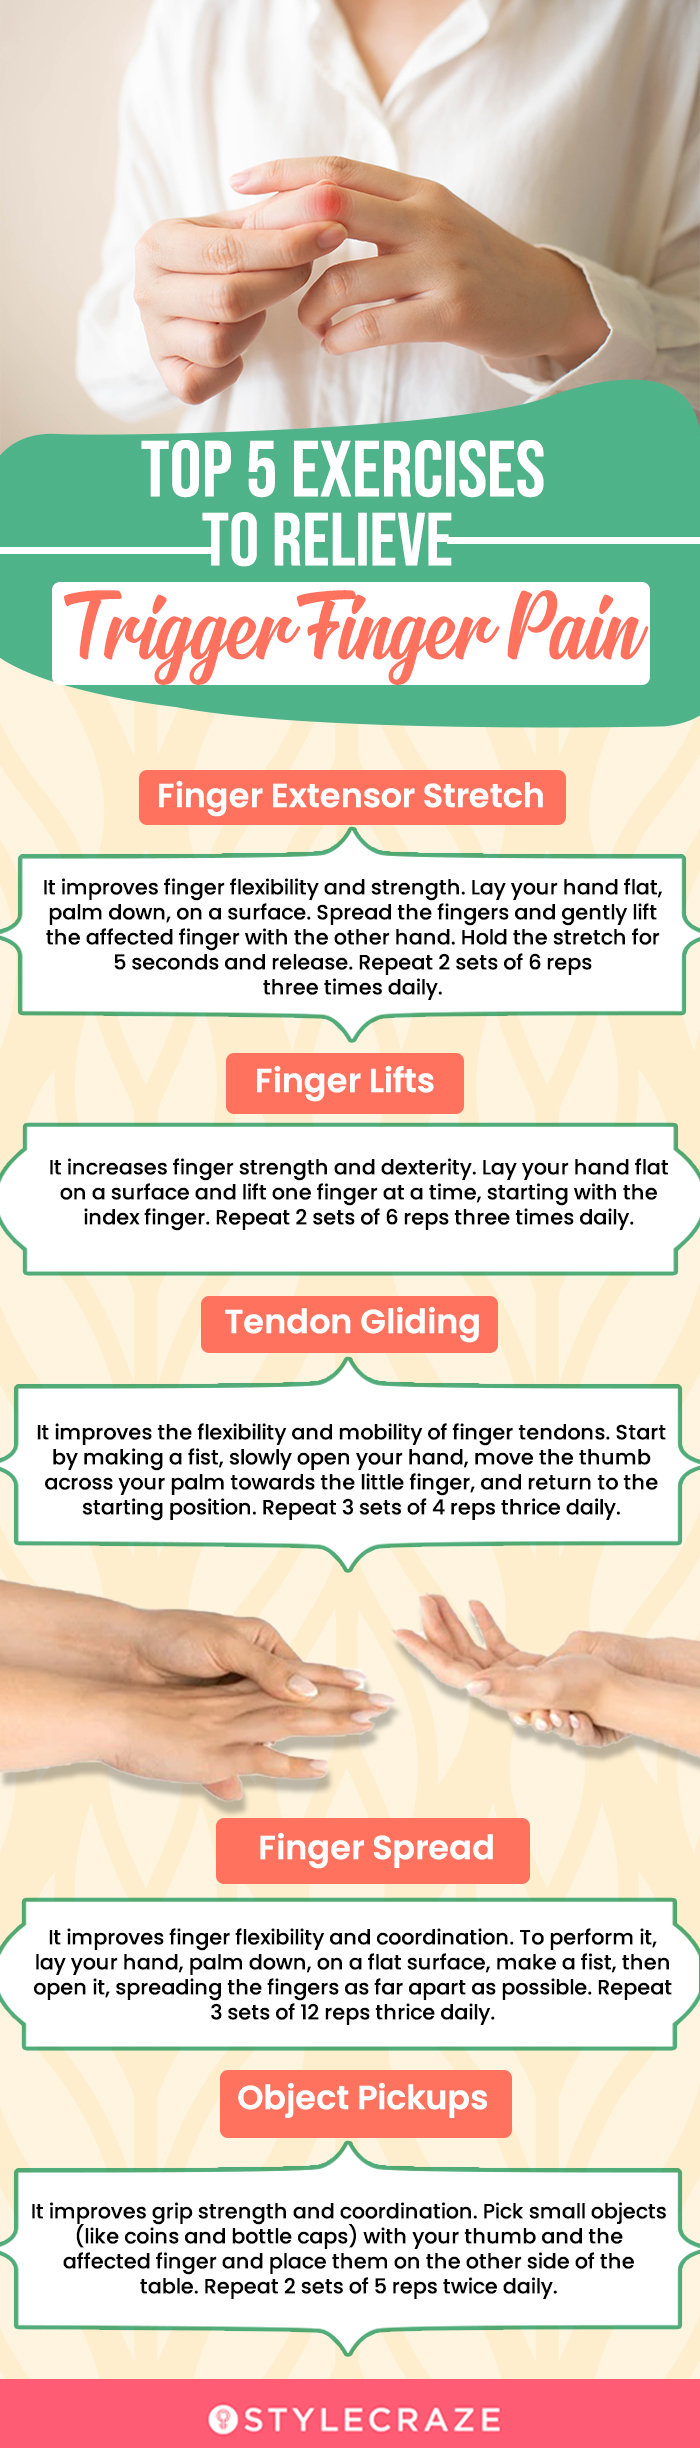 top 5 exercises to relieve trigger finger pain(infographic)